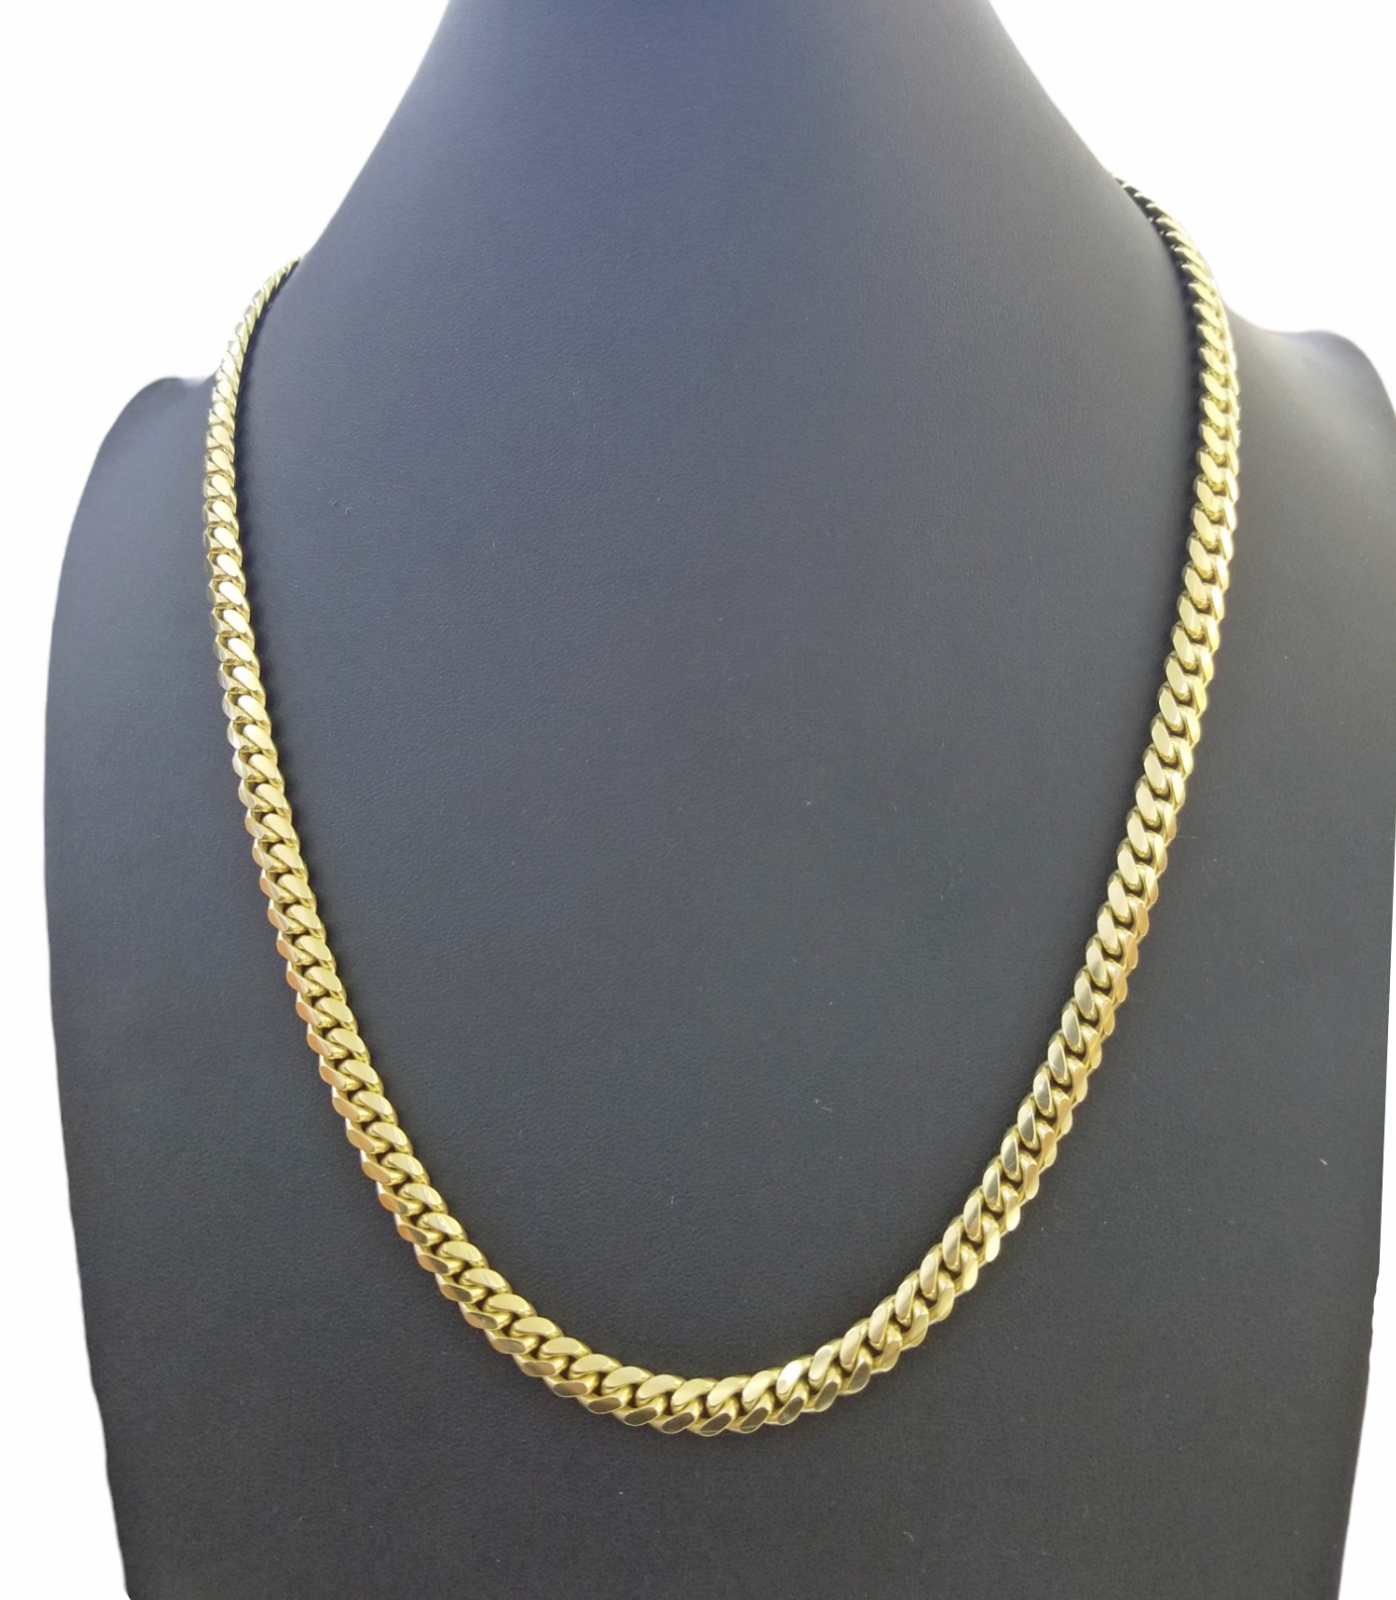 10K Gold Miami Cuban Link Chain SOLID Real 24 Inch 7mm On Sale Free Shipping